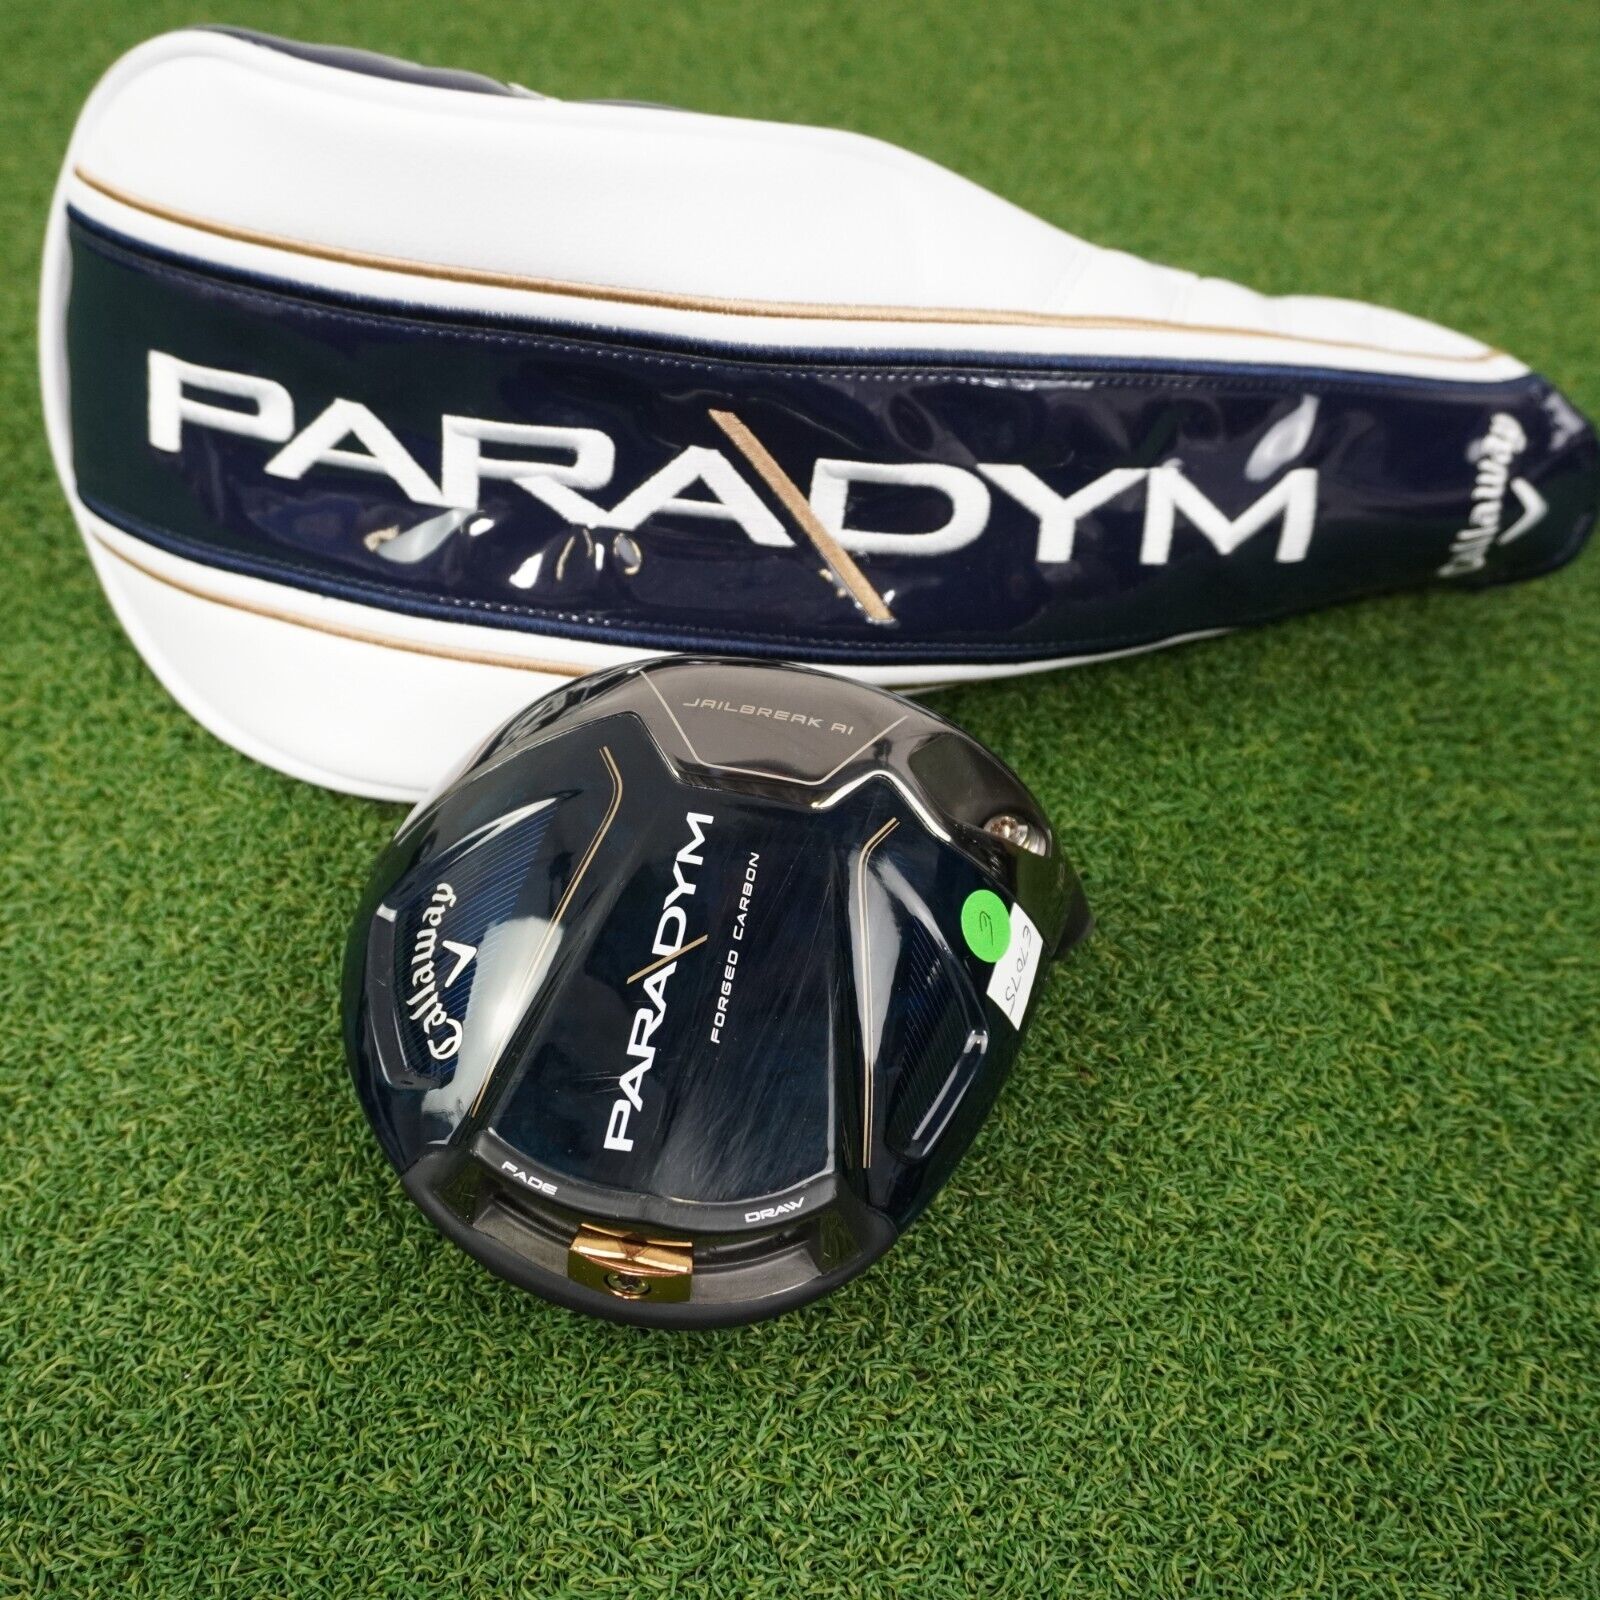 paradym driver head and head cover on grass